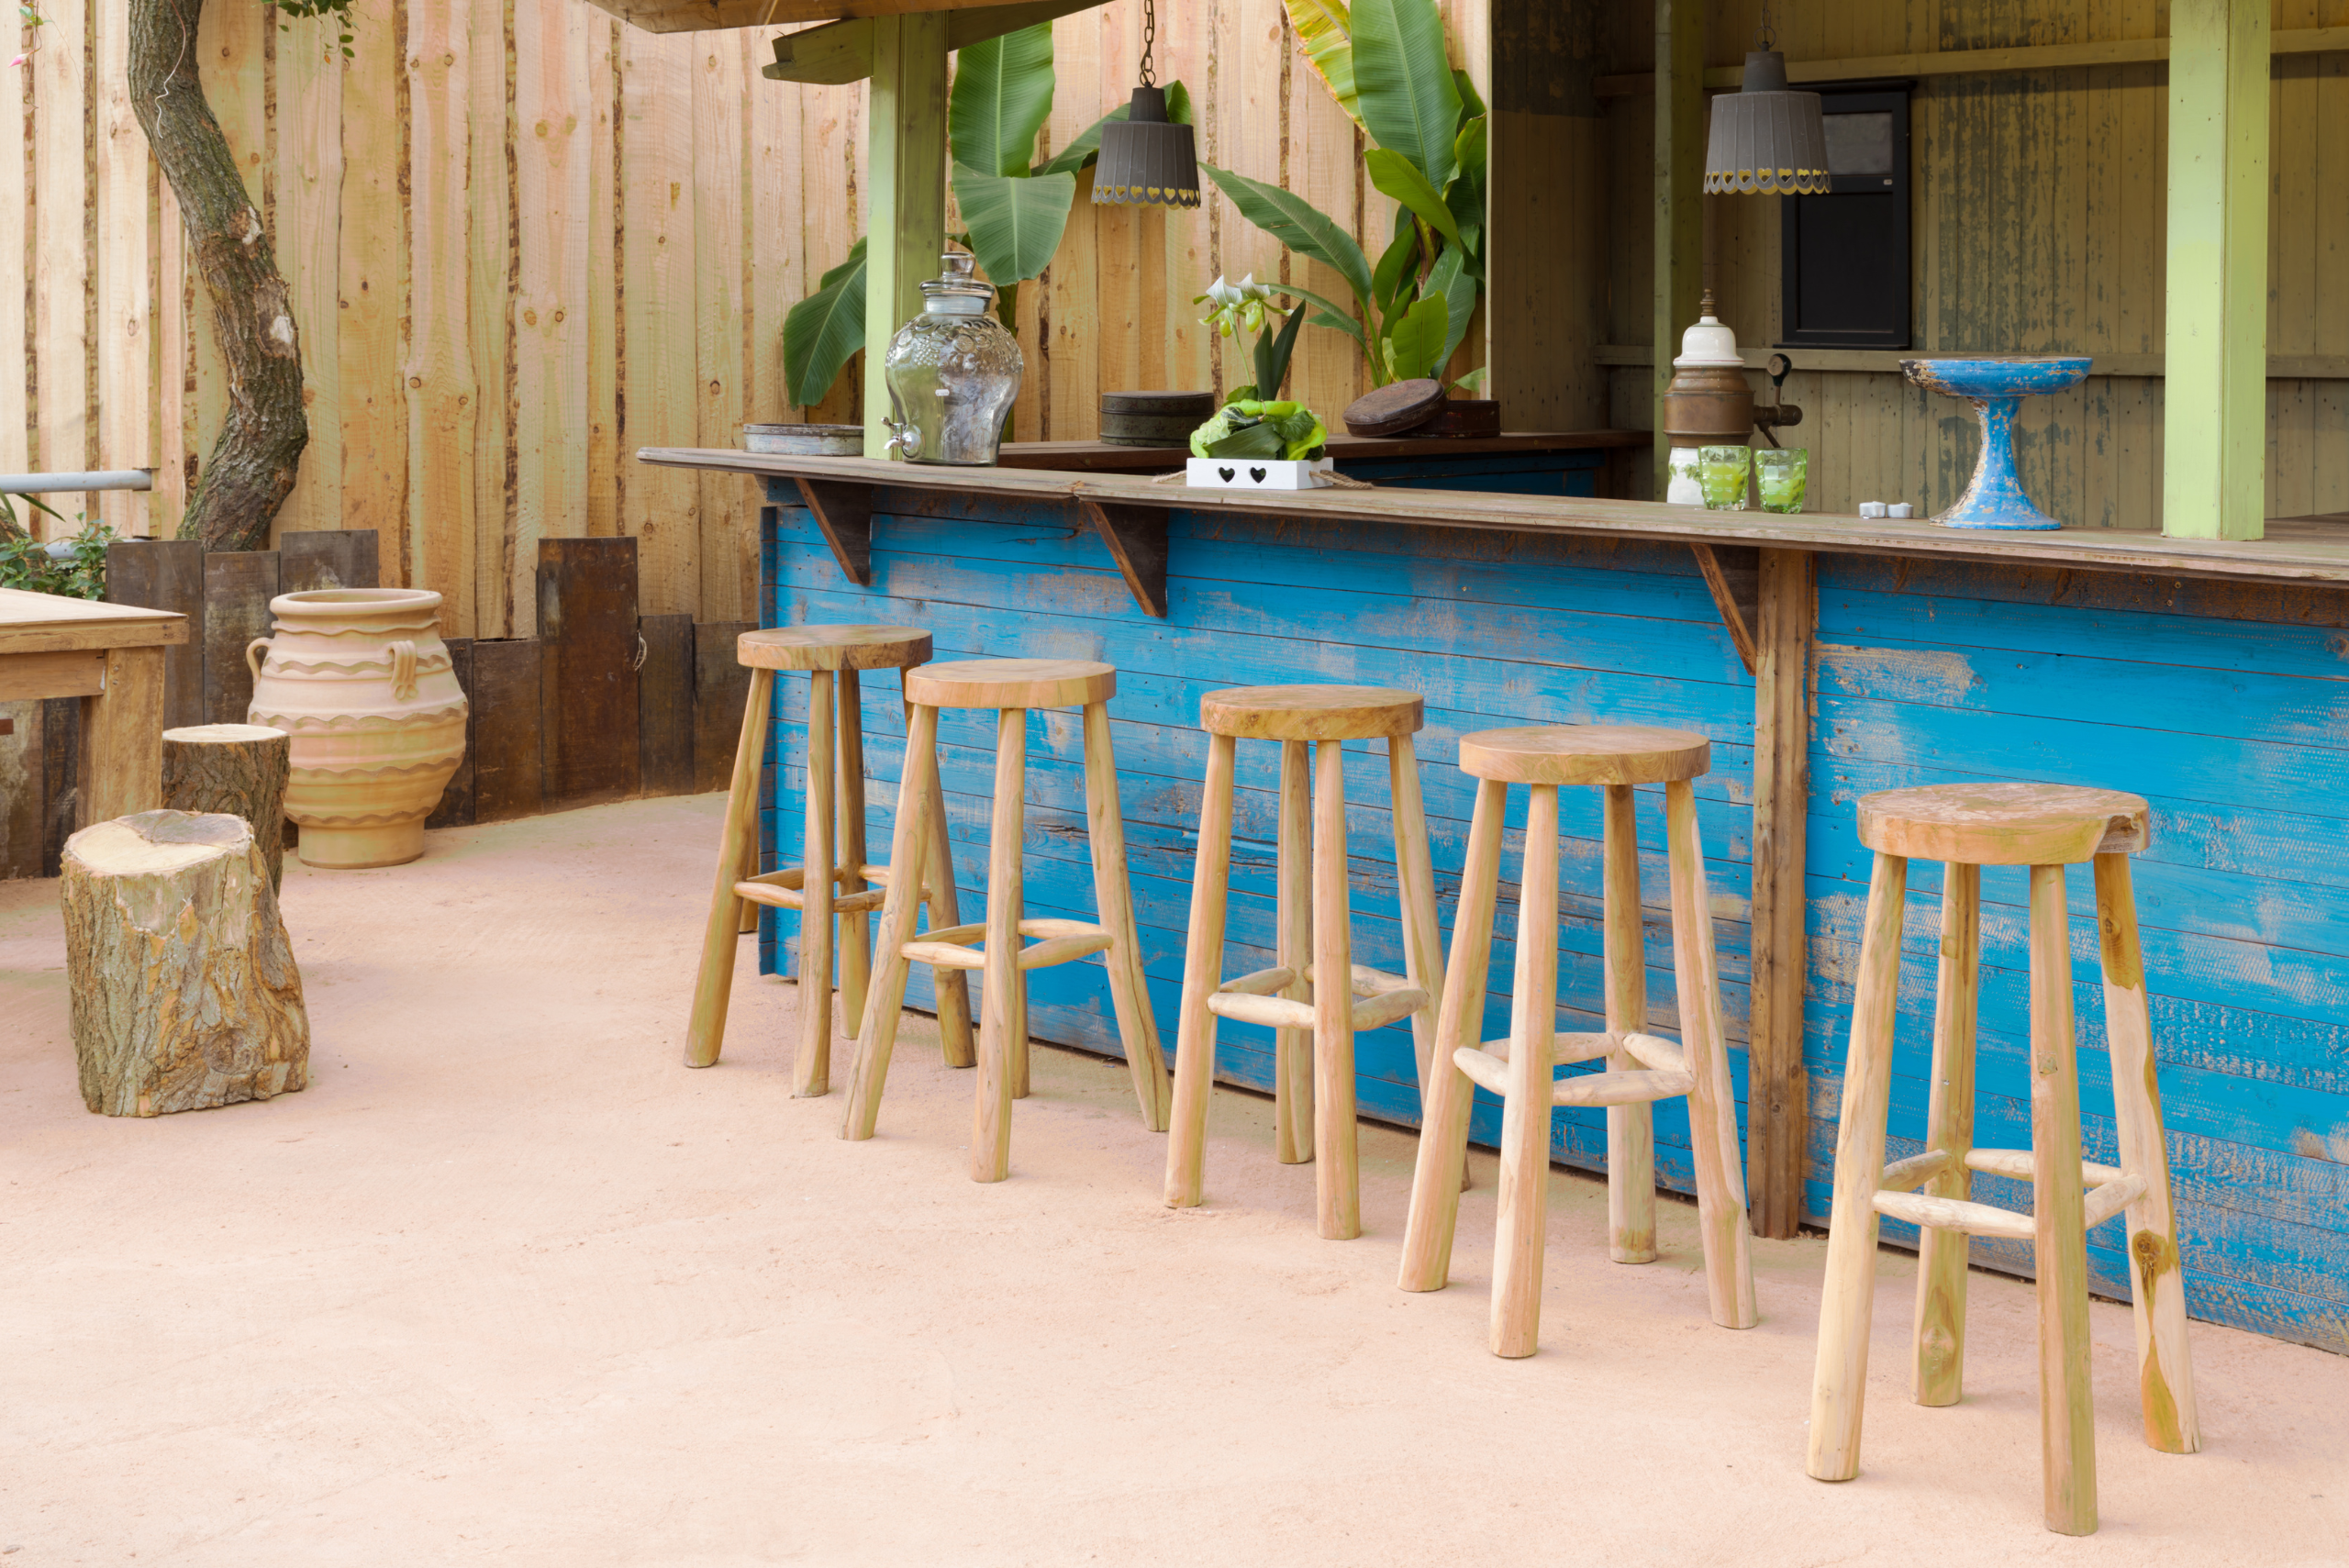 A wooden DIY outdoor bar with blue color.